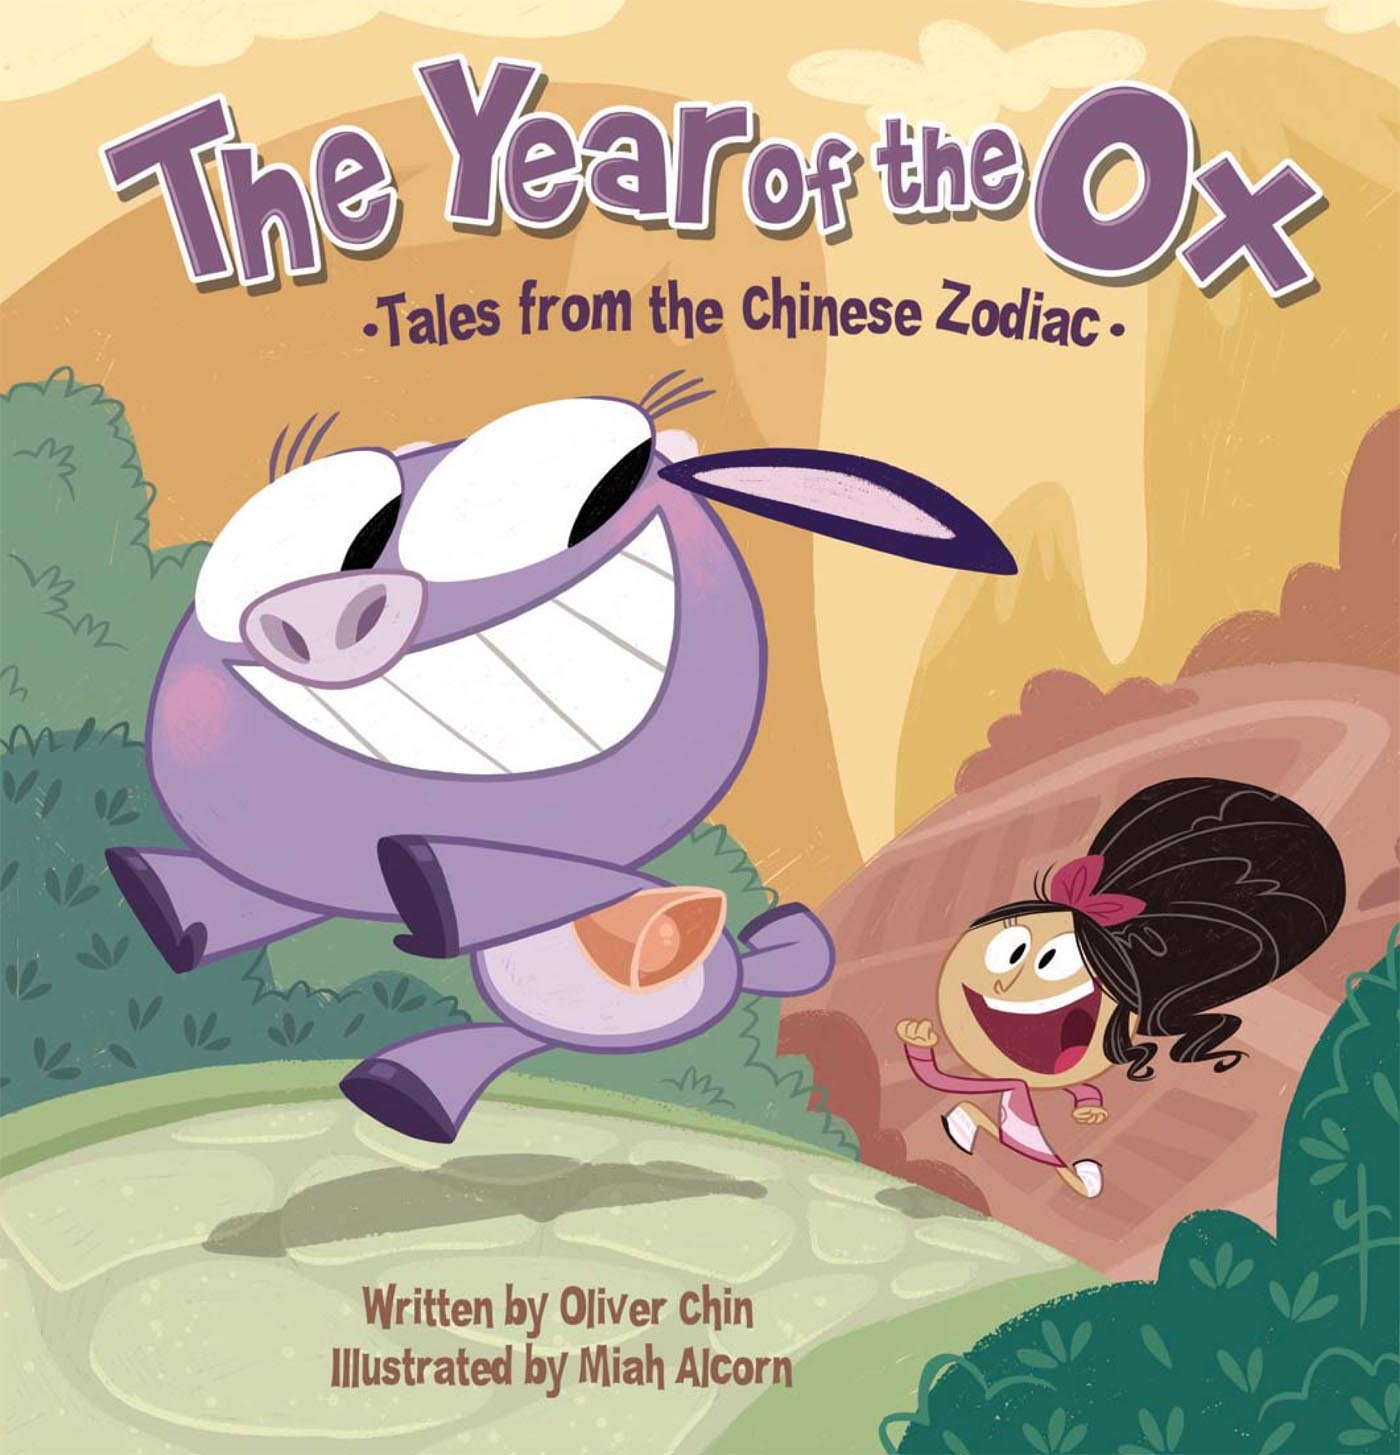 Book Cover of the Year of the Ox: Tales from the Chinese Zodiac